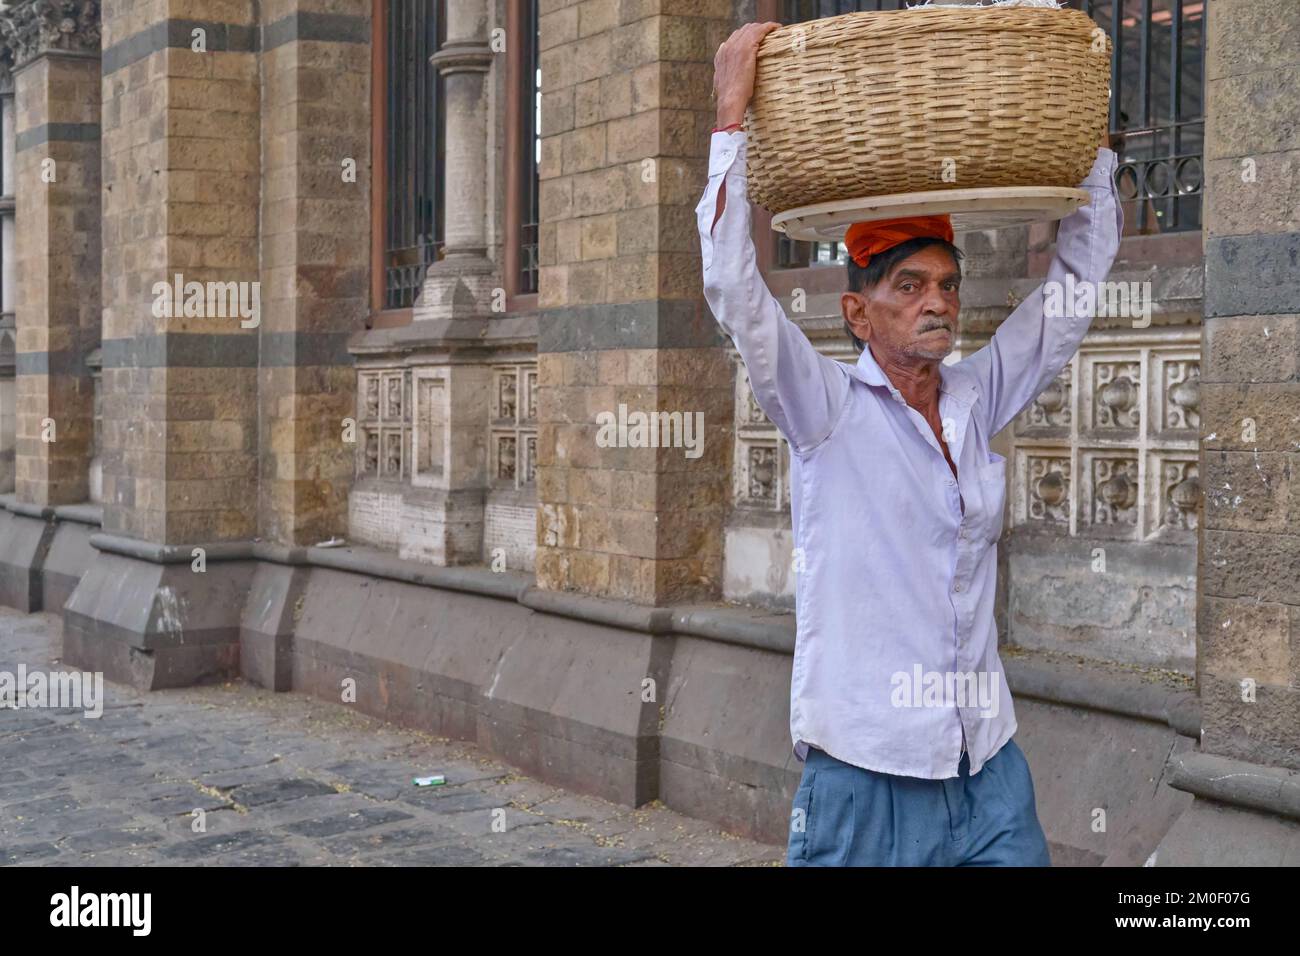 A porter with a basket of fish on his heads, outside Chhatrapati Shivaji Maharaj Terminus (CMST), in Mumbai, India, to forward the basket by train Stock Photo